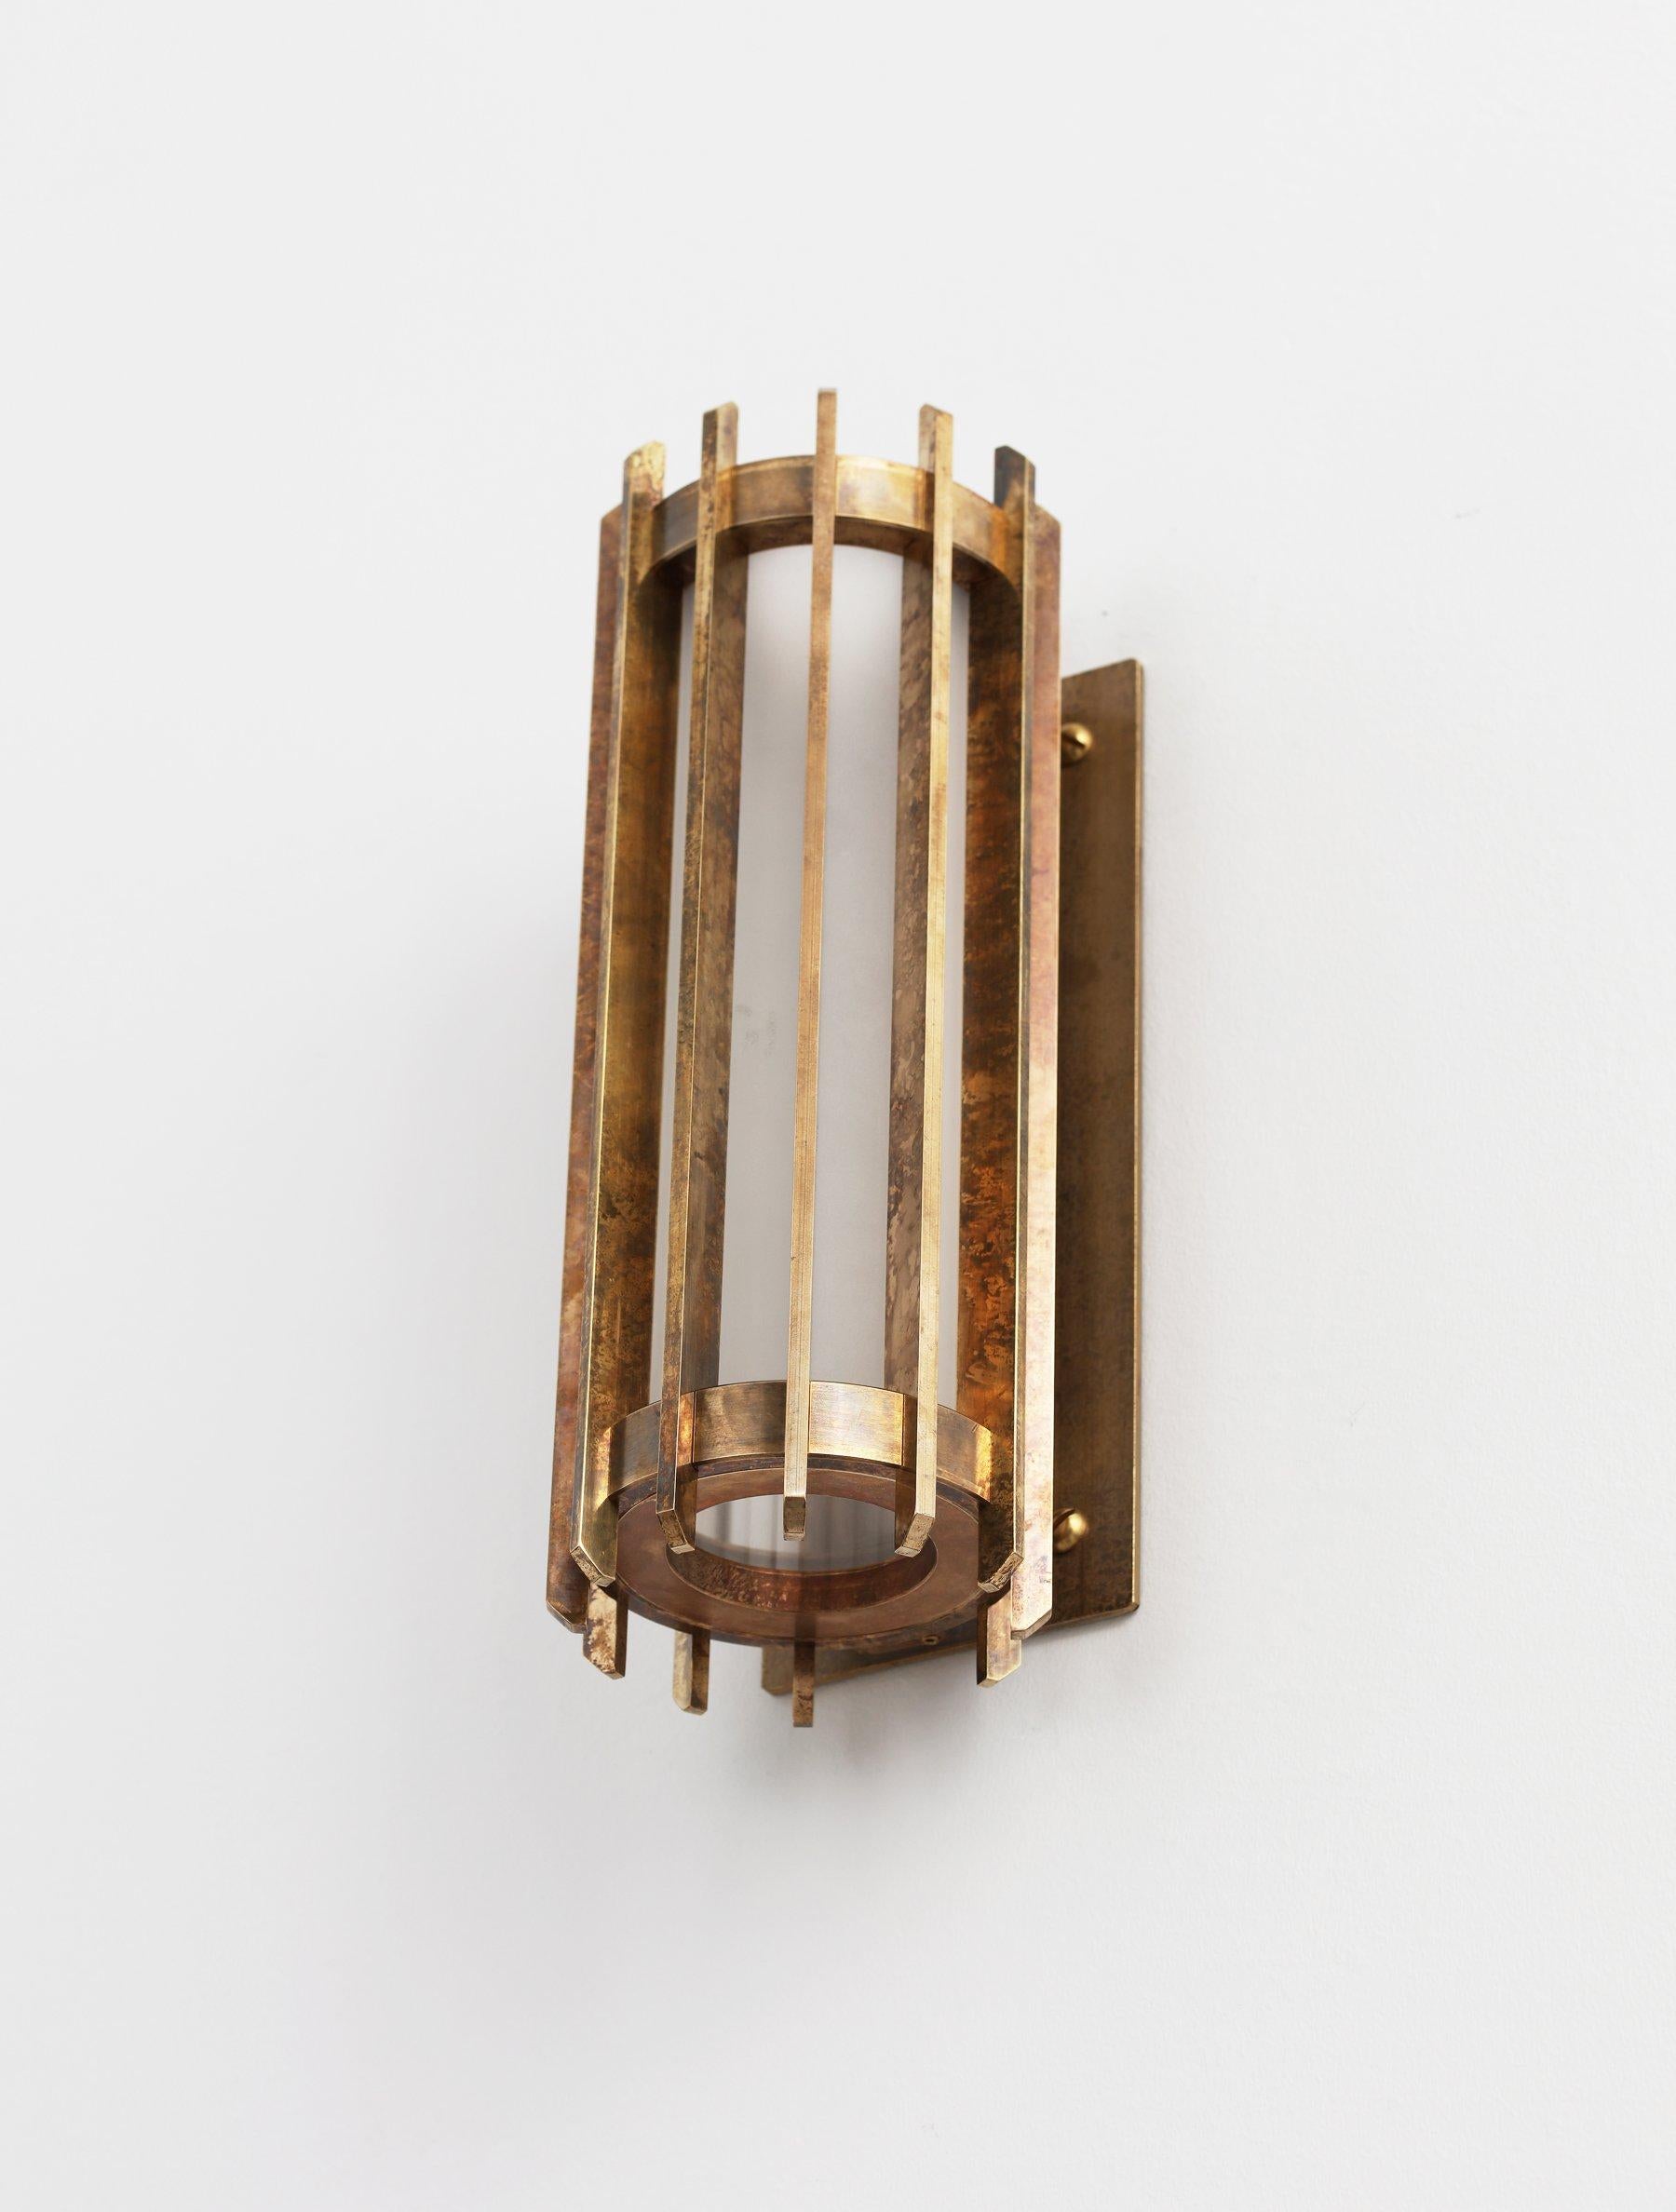 Cathedral is a contemporary representation of the Classic outdoor lantern. Milled solid-brass rings hold a frosted glass cylinder and linear brass slots diffuse the powerful light source. When viewing up close, the lamp is concealed in a way to